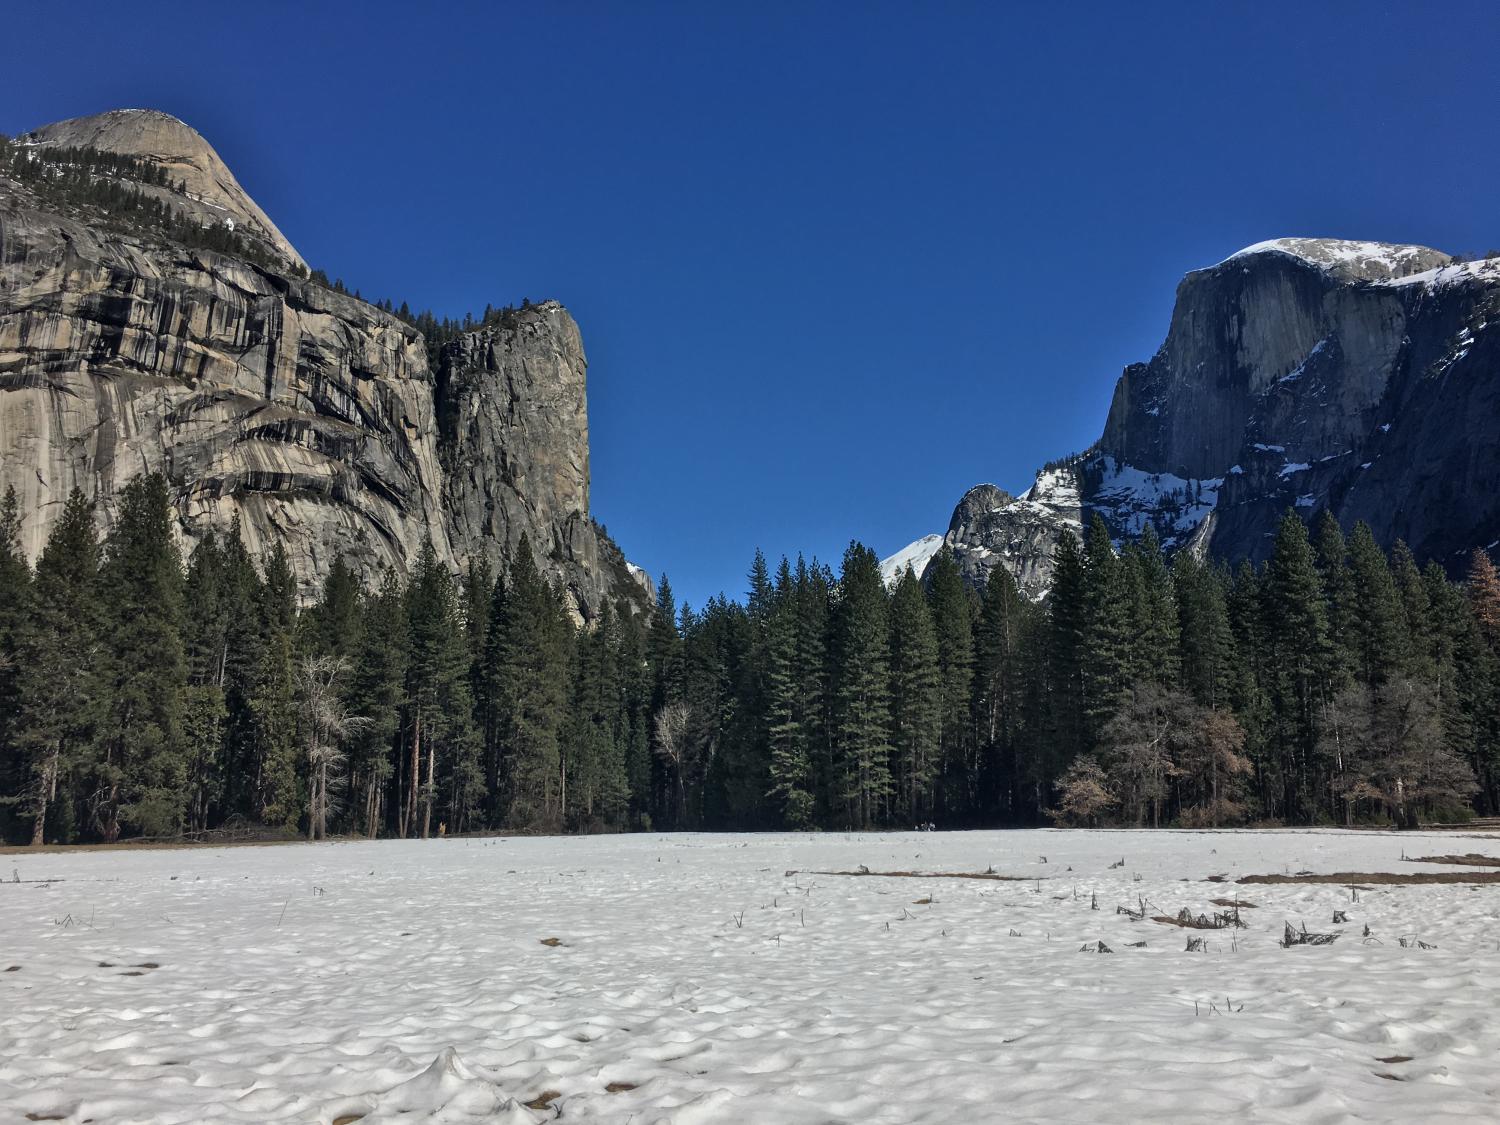 The federal government shutdown may seem ages ago; nevertheless, more U.S. companies could step up and consider U.S. national parks a part of their corporate responsibility efforts.